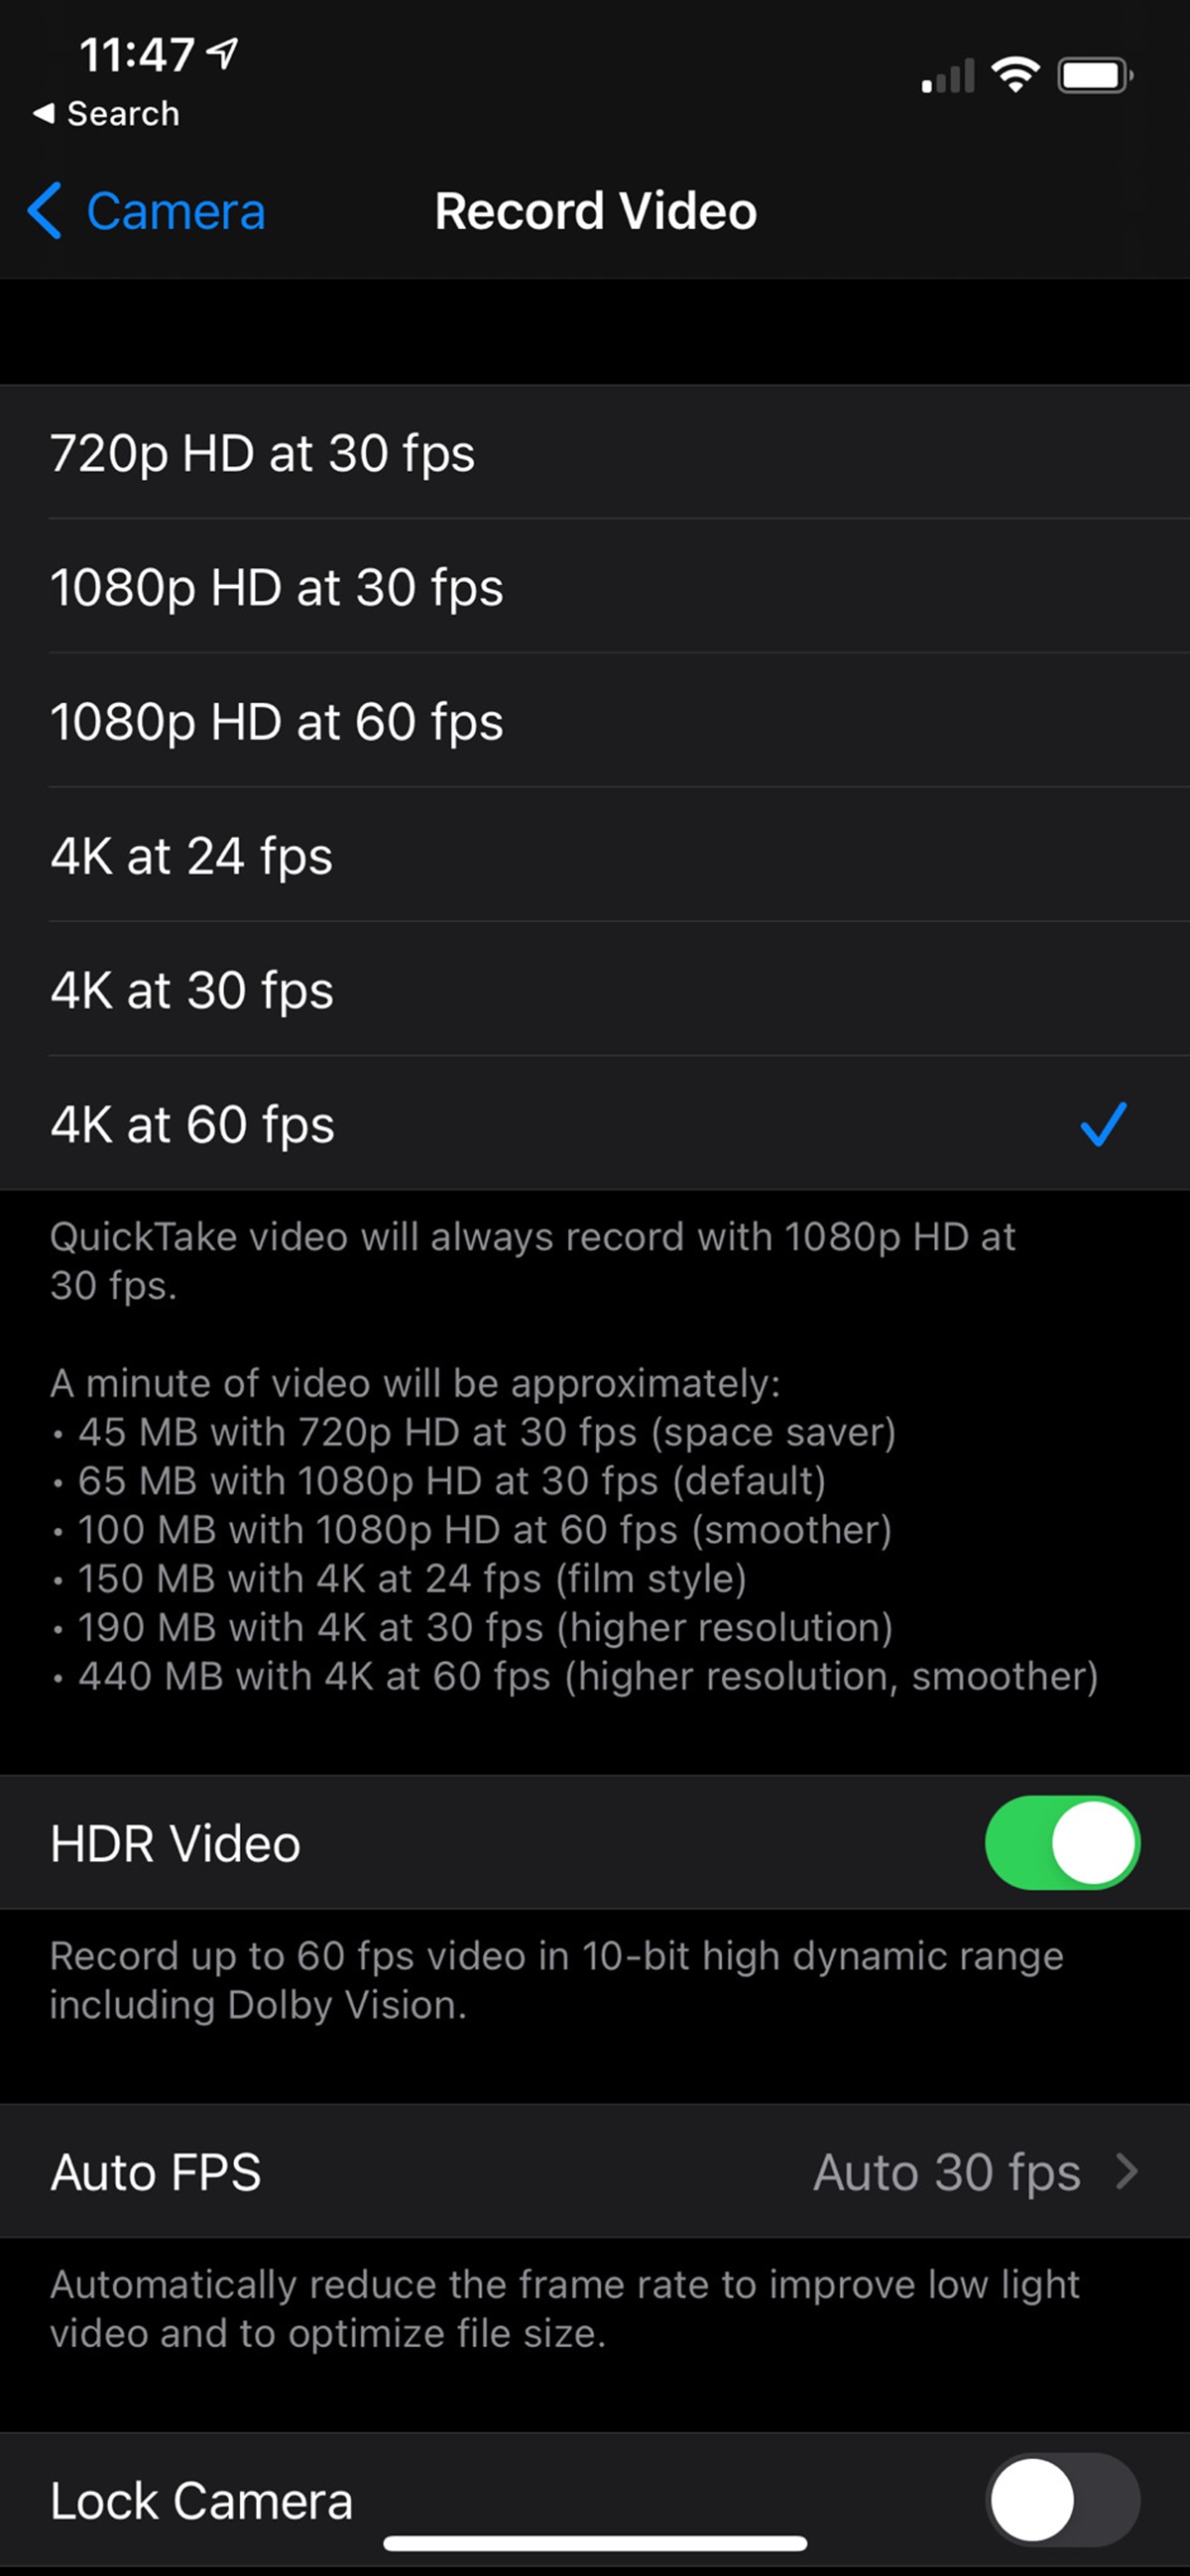 How Much Video Can You Record On An iPhone?